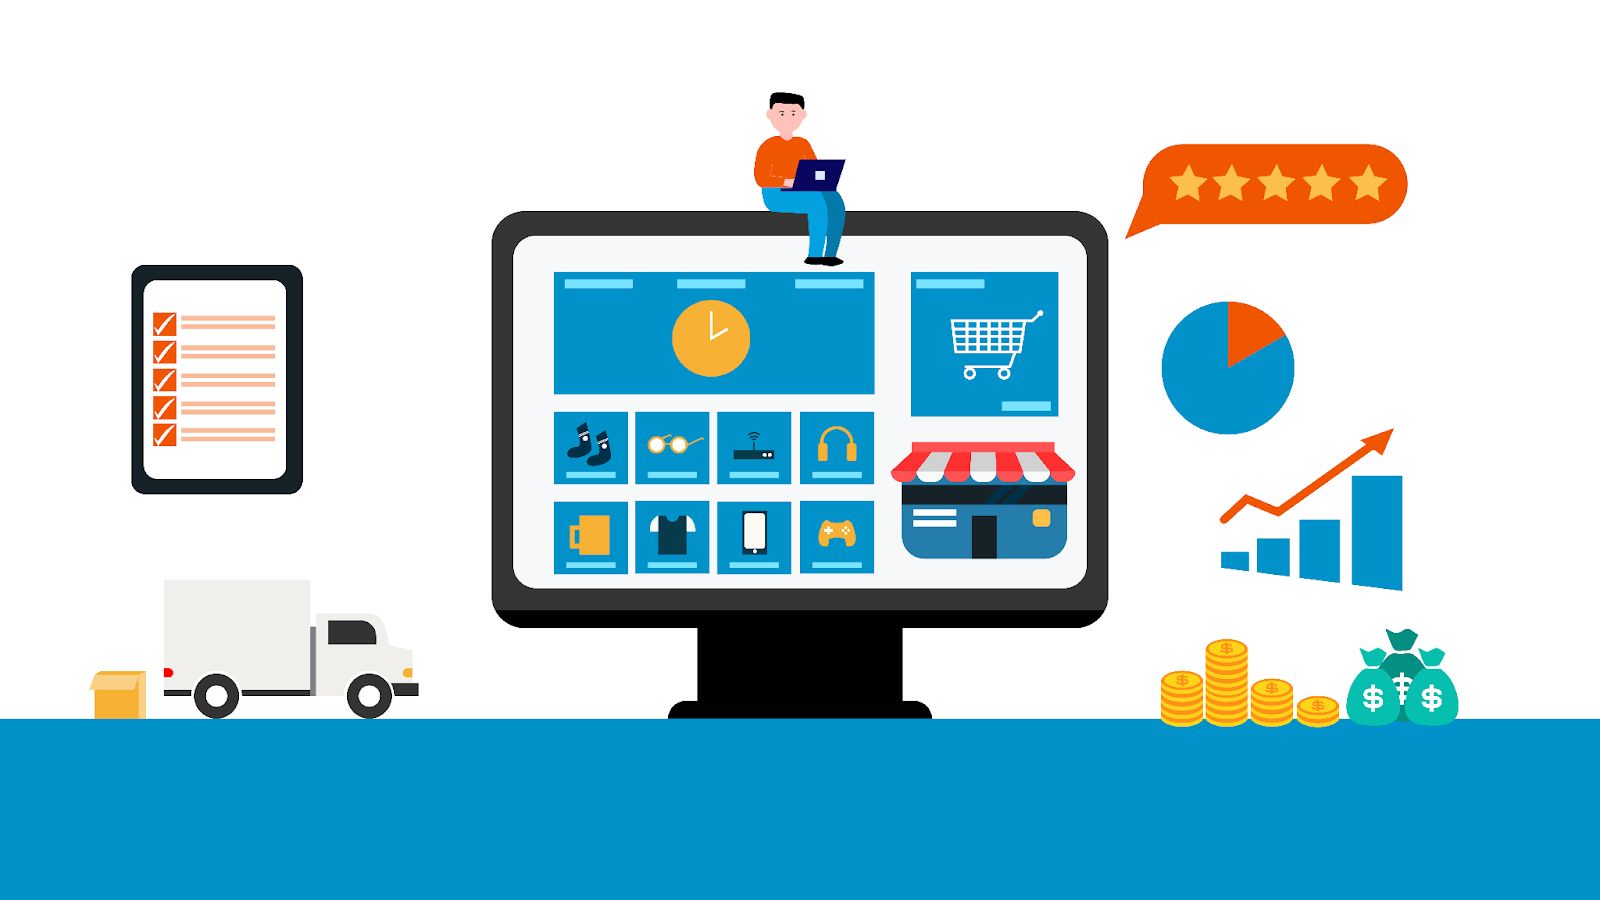 Ecommerce is a high-growth industry that offers scalability.